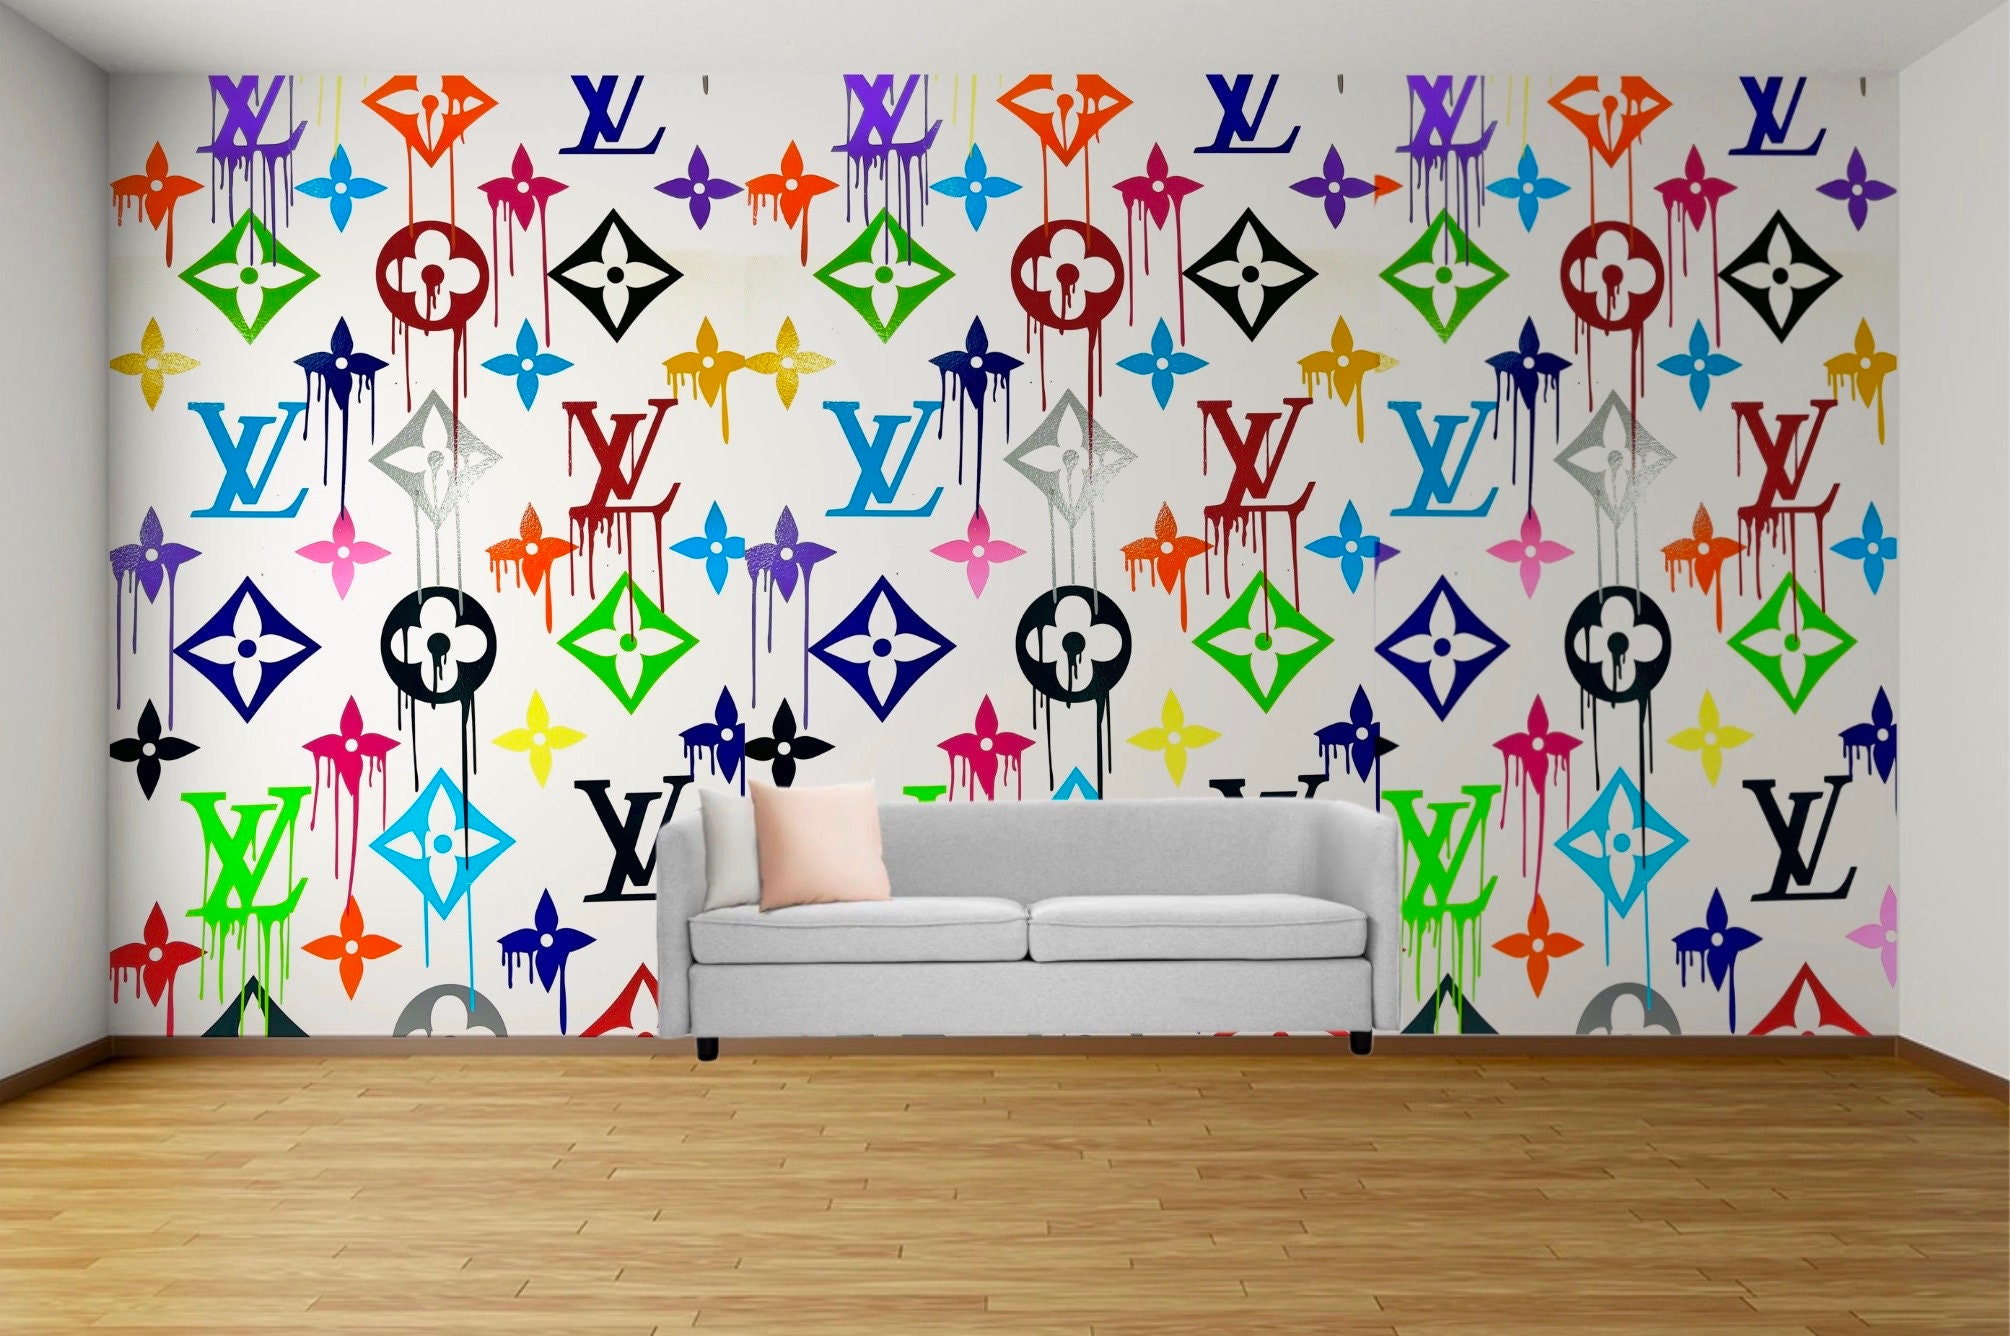 LOUIS VUITTON WALL  Bedroom wall designs, Wall decals, Vinyl wall decals